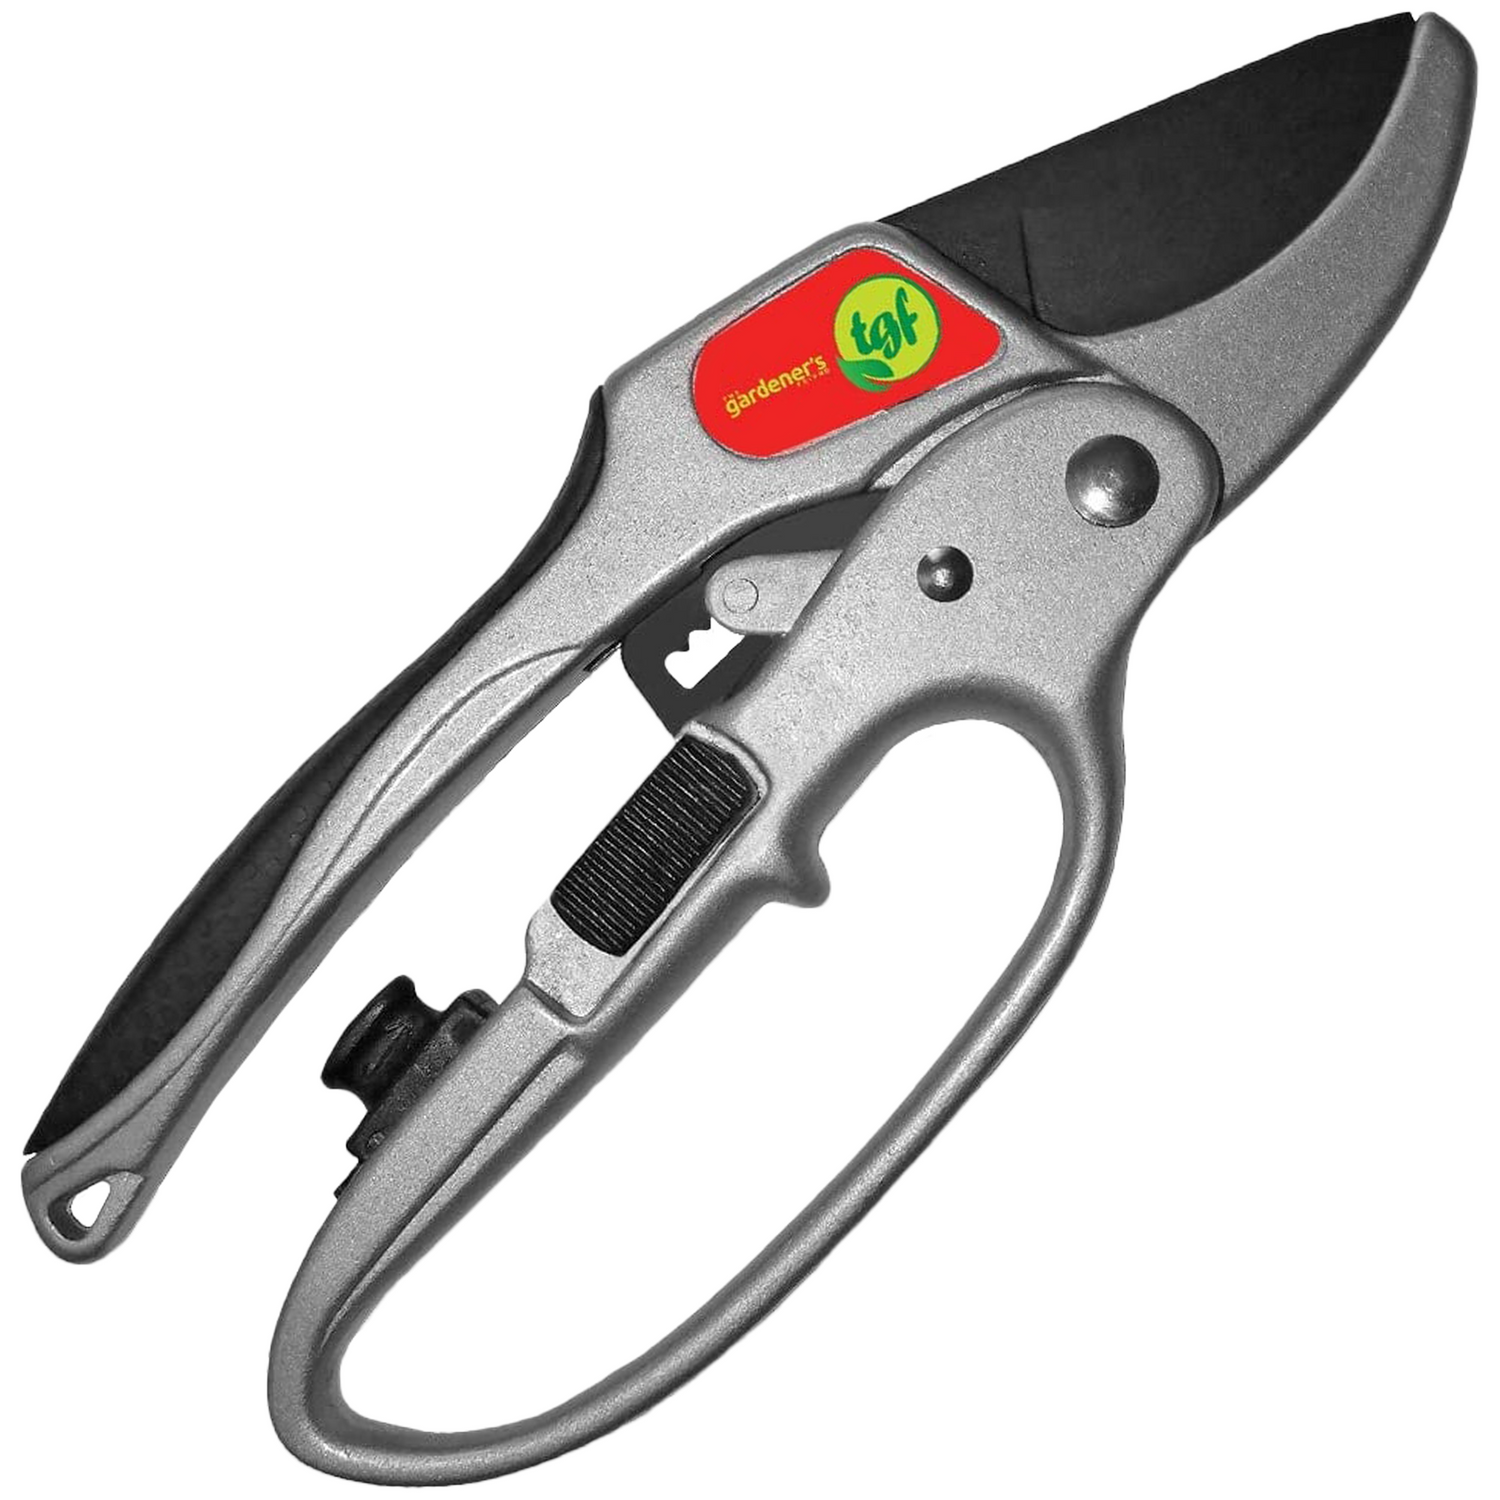 Ratchet pruning shears with assisted action and heavy-duty nonstick steel blade by The Gardener's Friend